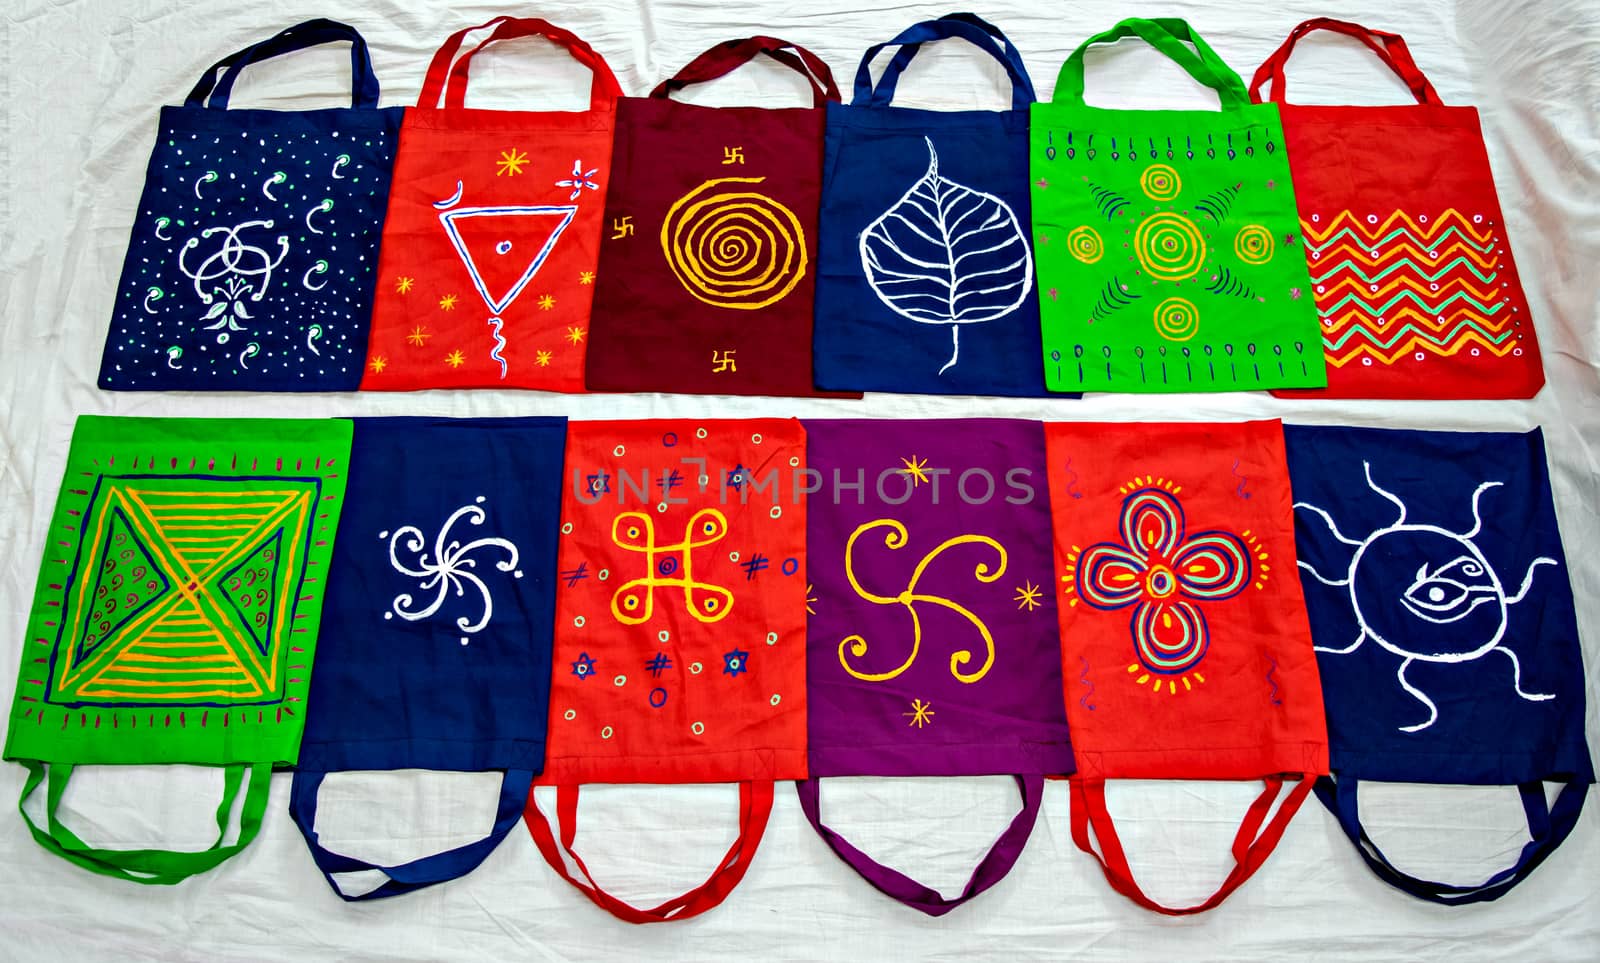 Colorful cotton bags with hand painted symbols arranged in pattern. Can be used as background.